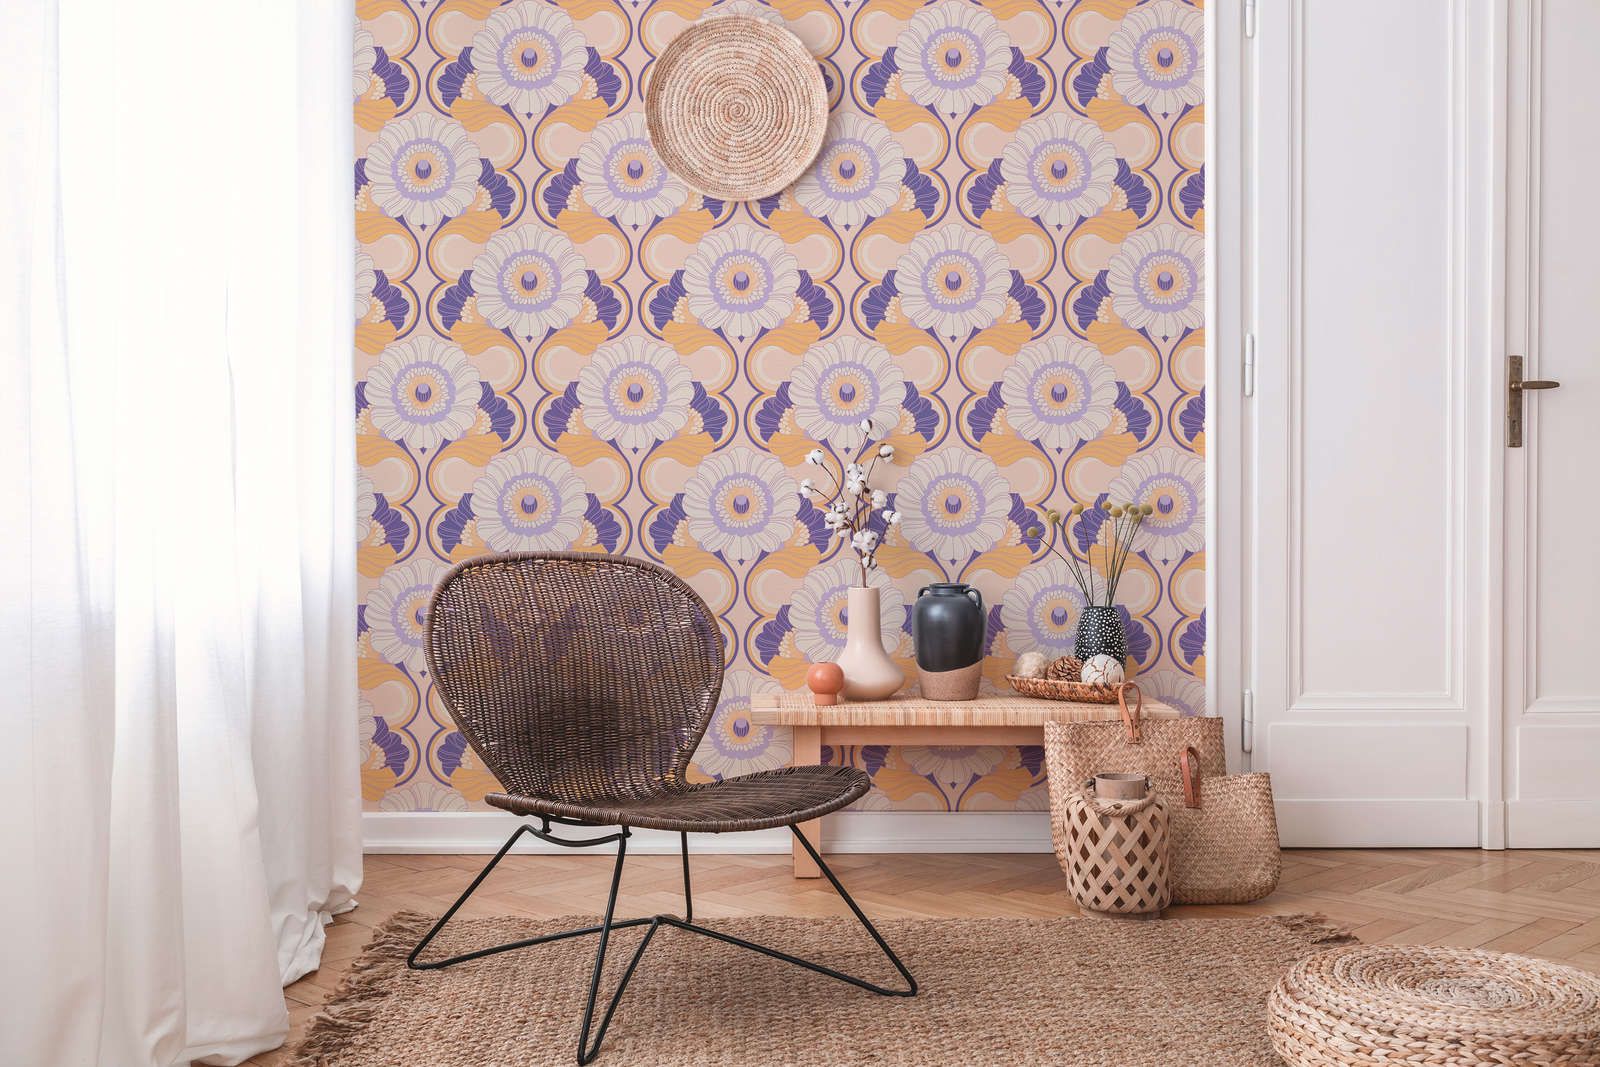             Retro wallpaper with floral pattern - beige, yellow, purple
        